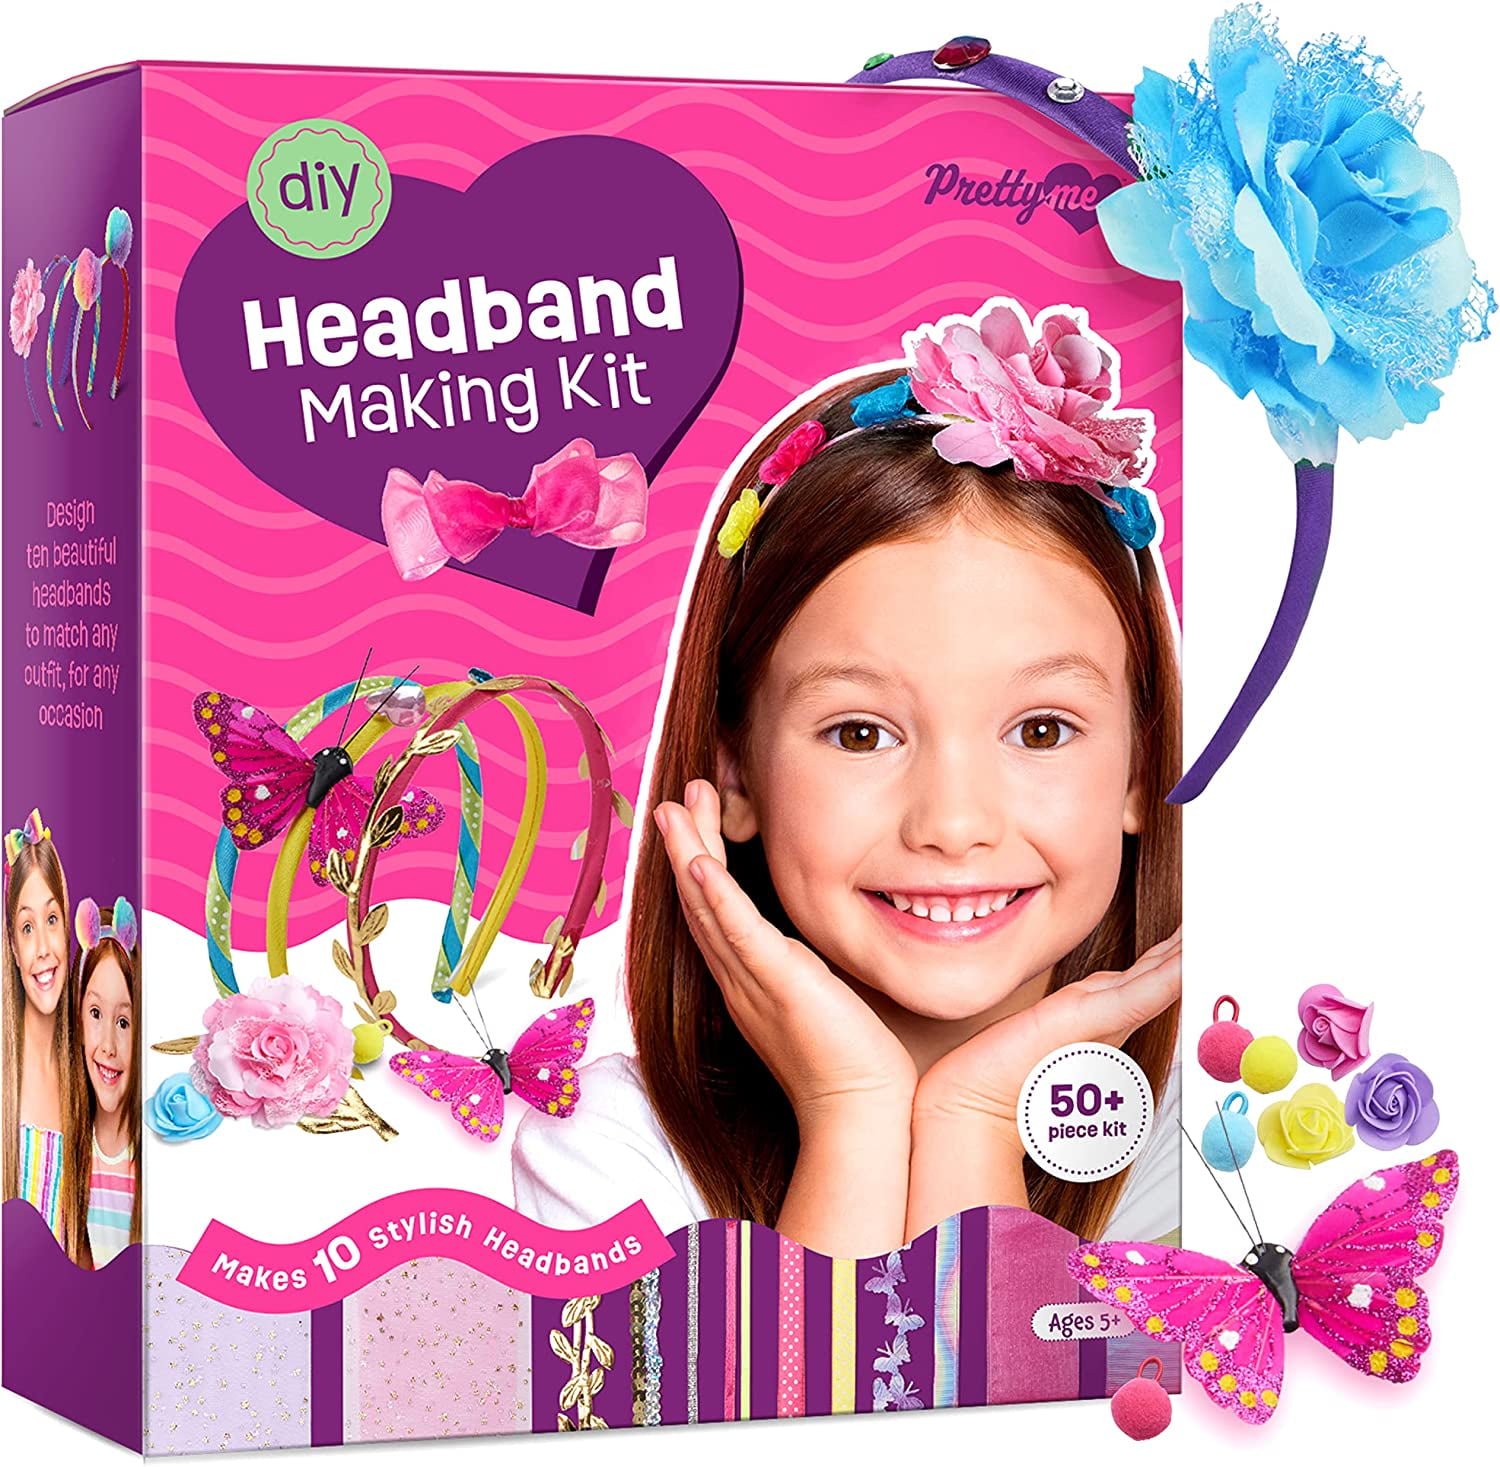 GENIUS GIFTS FOR 10 YEAR OLD GIRLS THAT THEY'LL LOVE • Life by Melissa